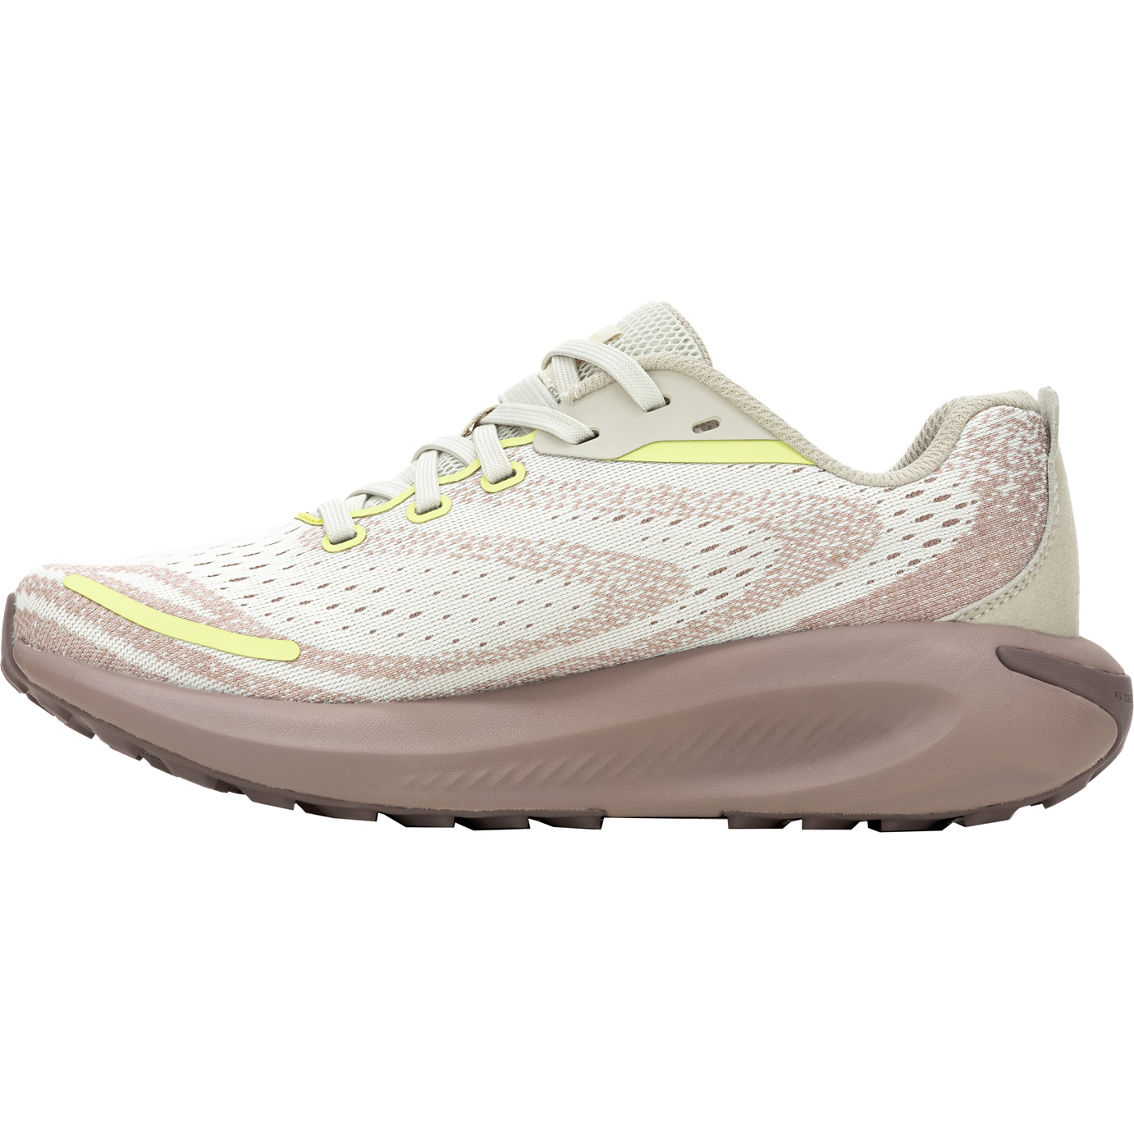 Merrell Women's Morphlite Parchment Trail Running Shoes - Image 3 of 6